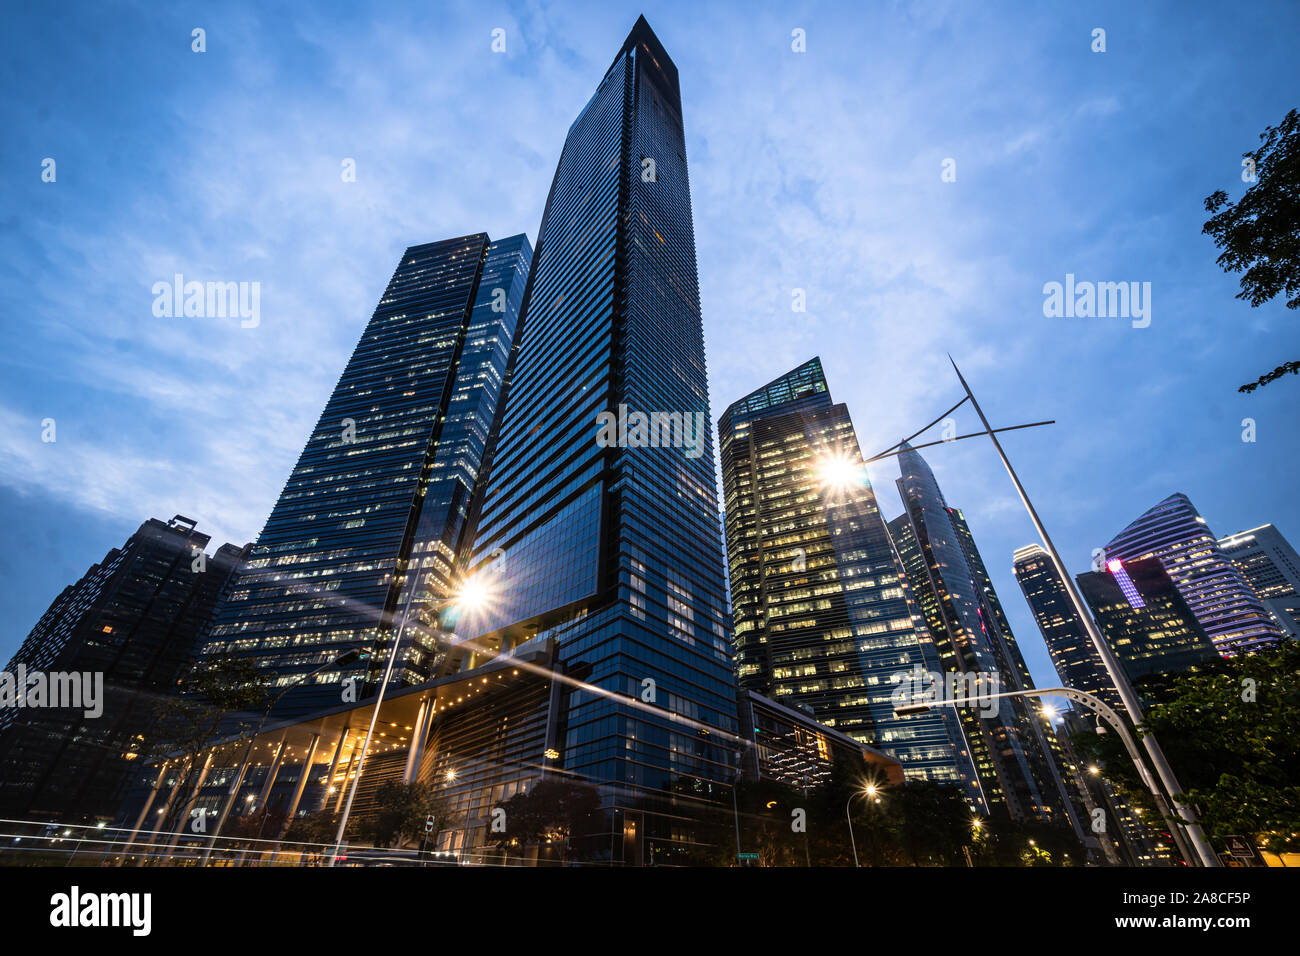 Dramatic view of modern skyscrapers in the Singapore business district at nightfall in Singapore, Southeast Asia Stock Photo